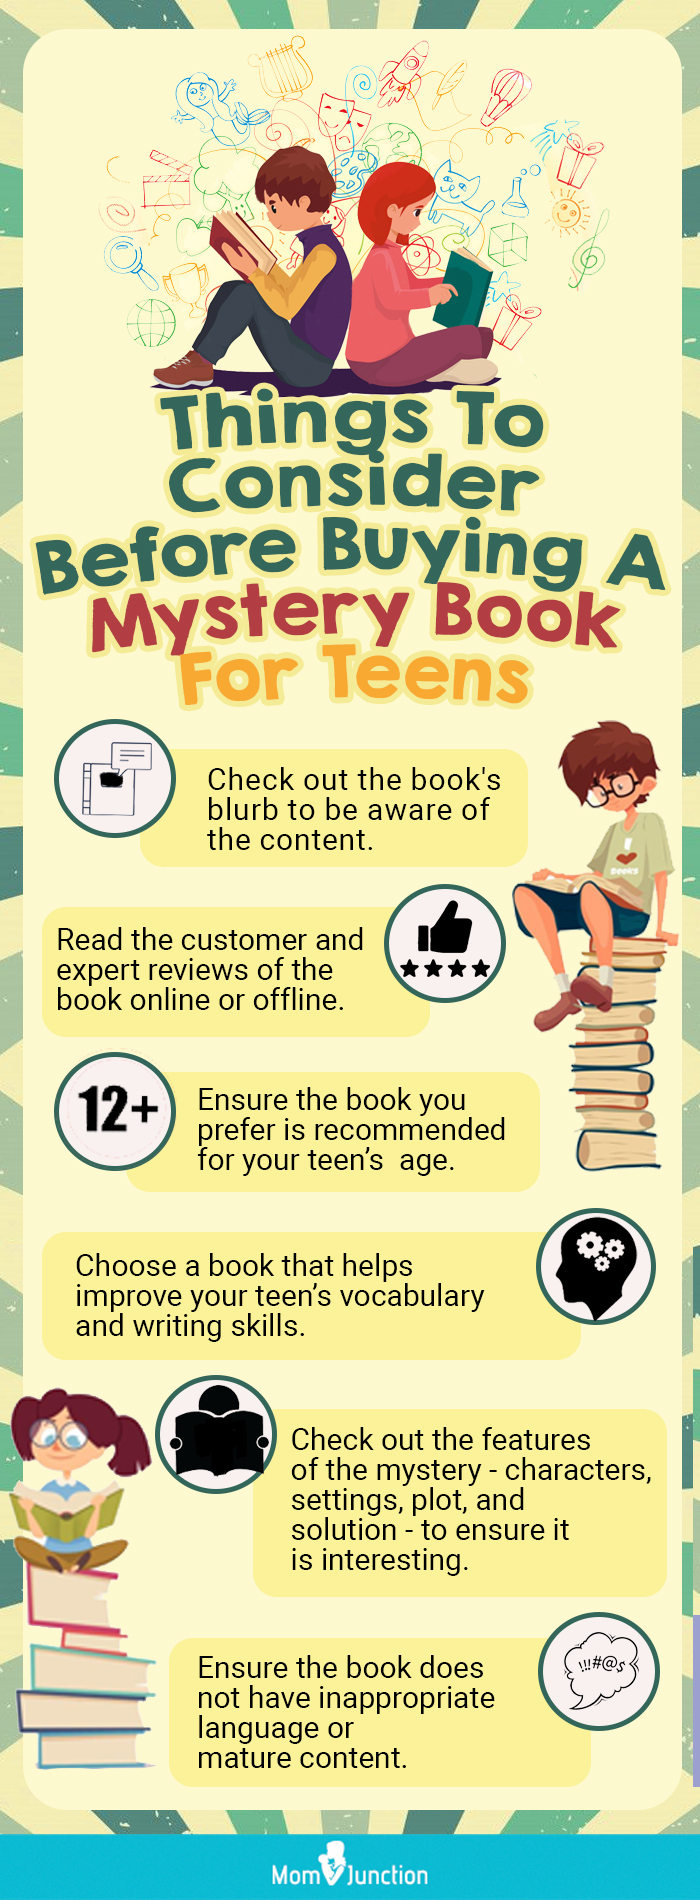 Things To Consider Before Buying A Mystery Book For Teens (infographic)